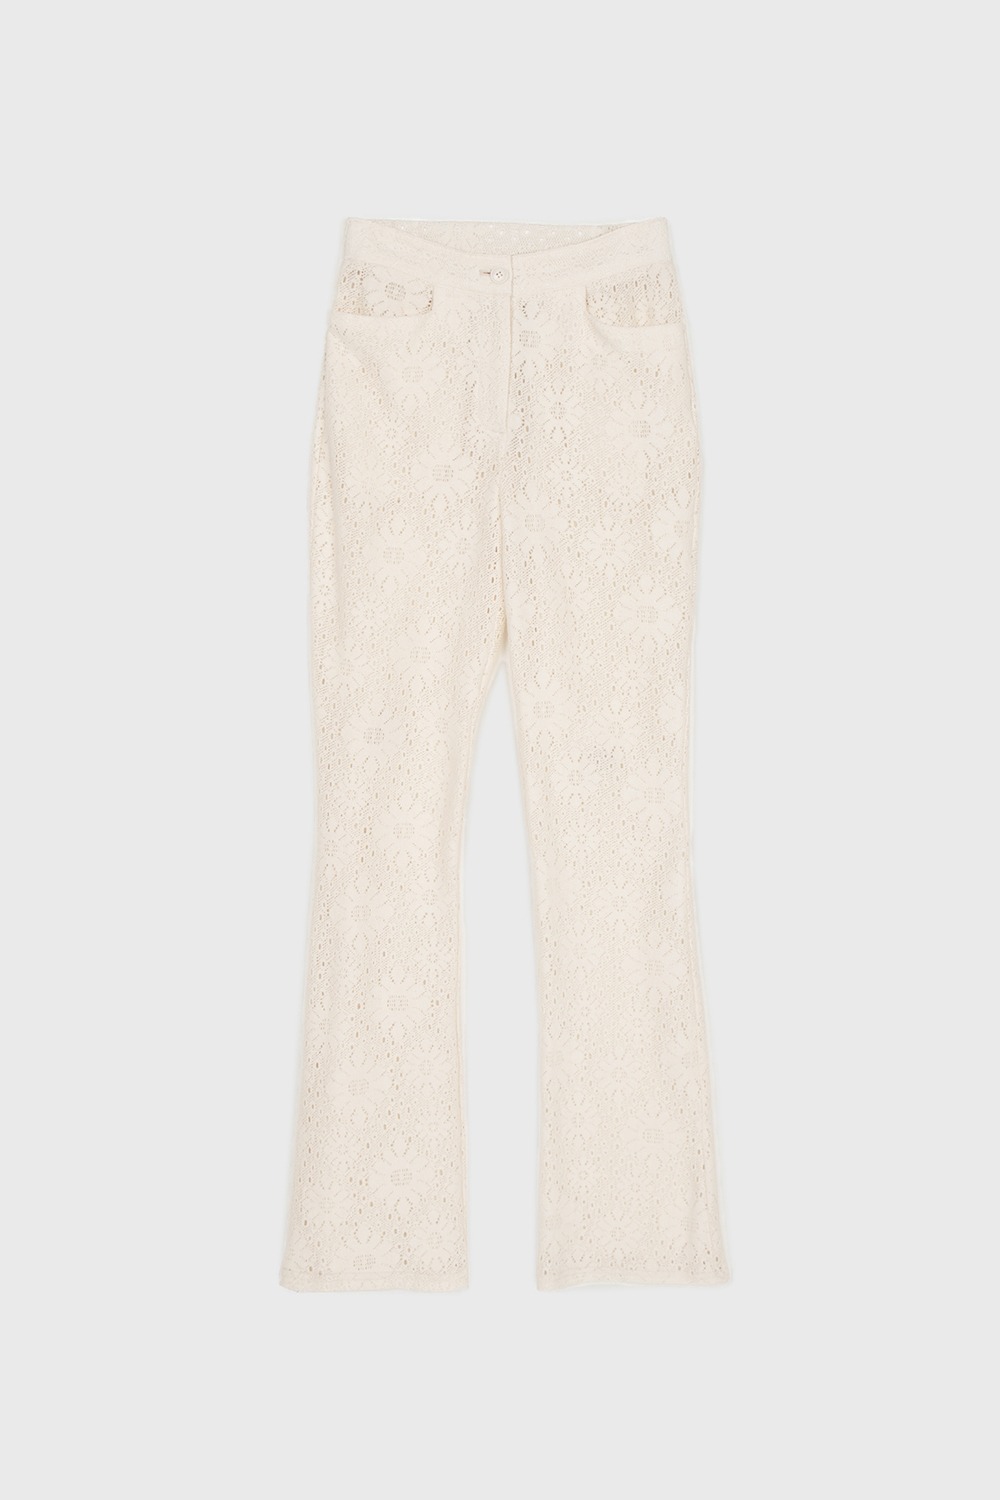 MUSED BOOTSCUT PANTS - LACE NATURAL